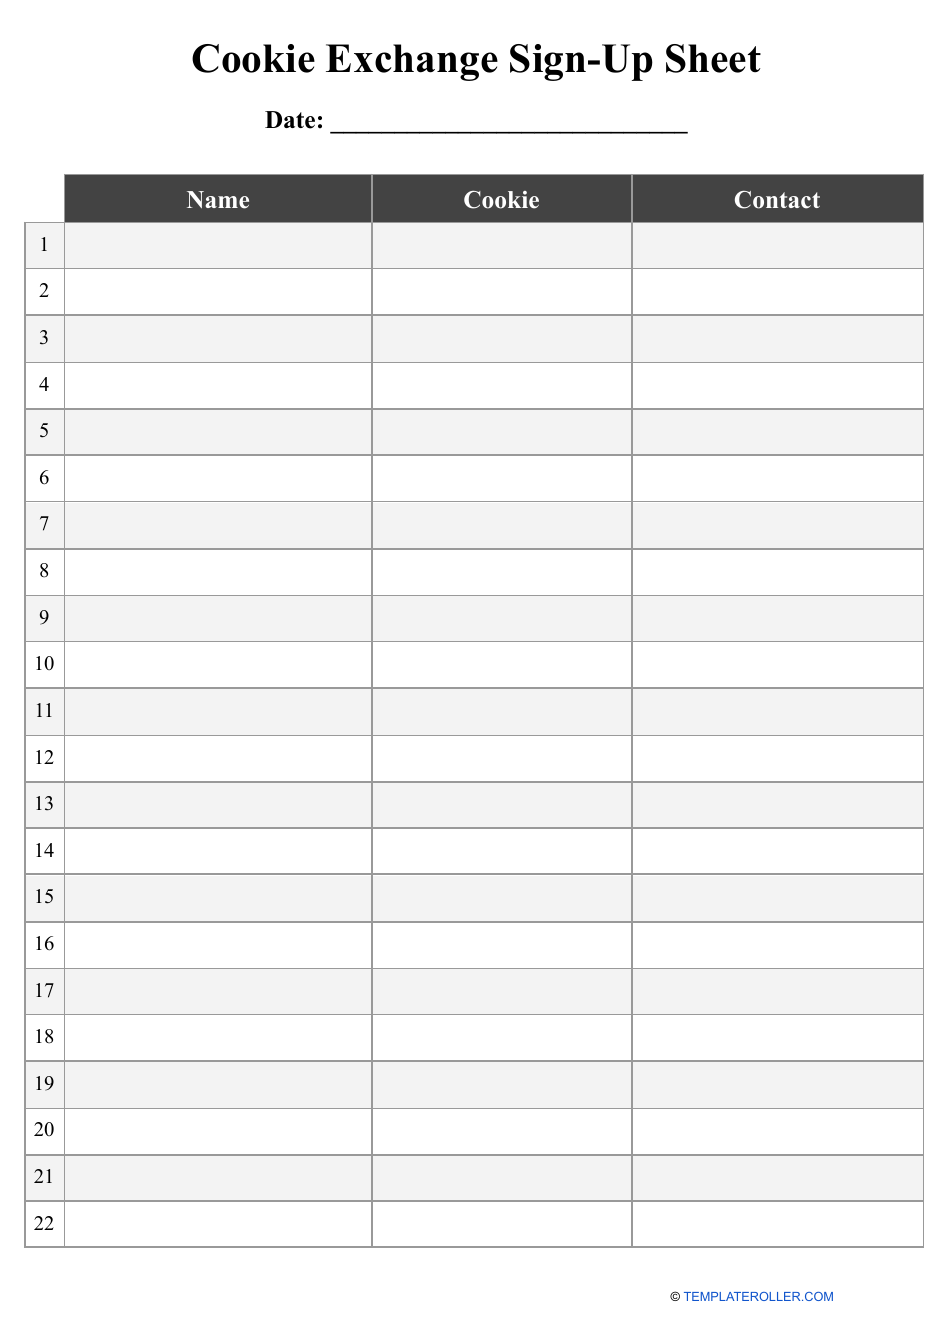 Cookie Exchange Sign-Up Sheet, Page 1